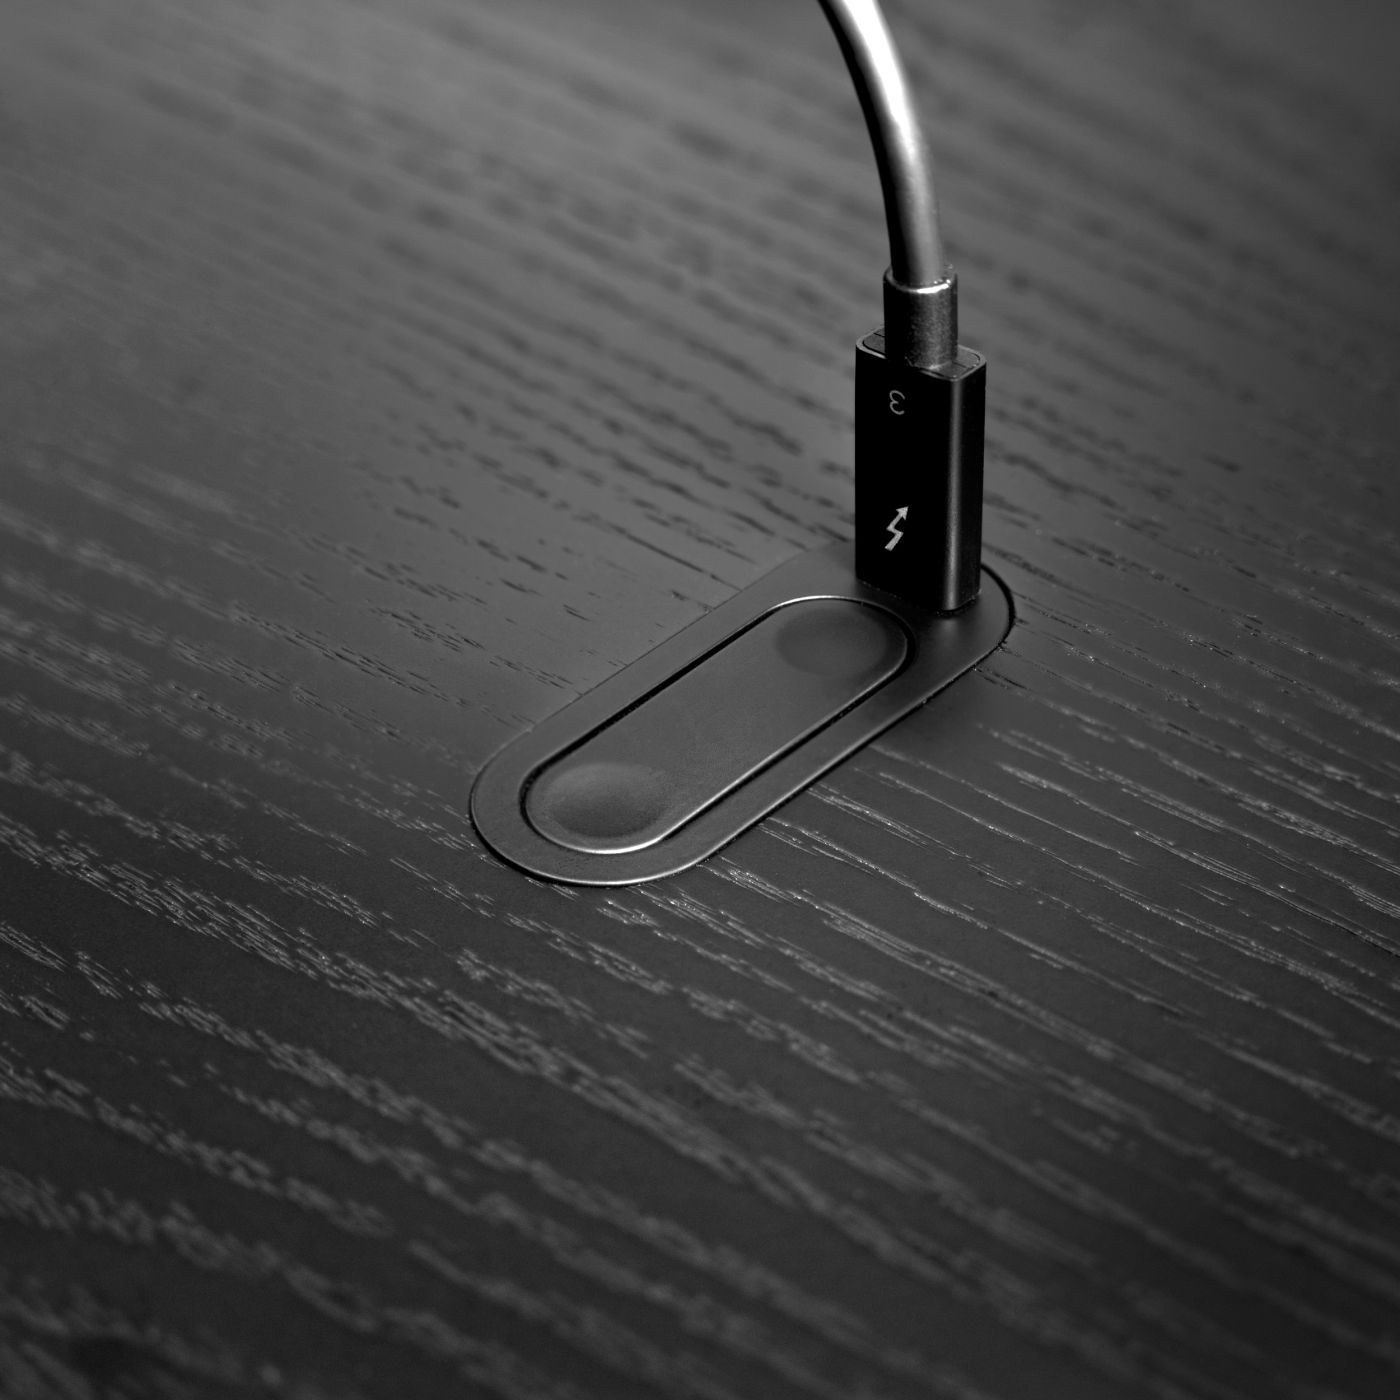 Helm's surface control incorporates minimalist adjustable-height controls with USB-C connectivity.